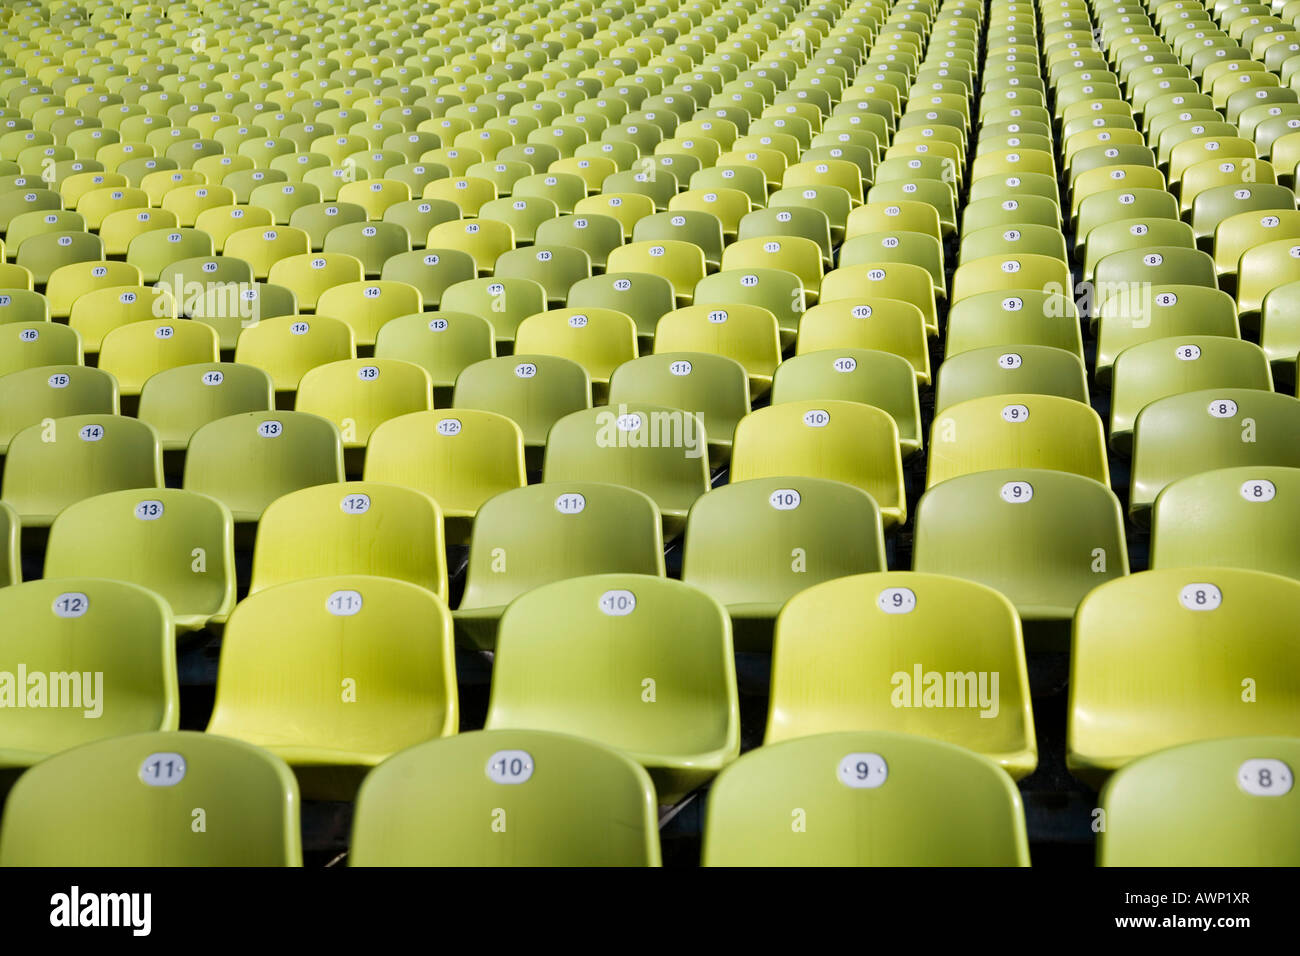 Green seats in a row Stock Photo